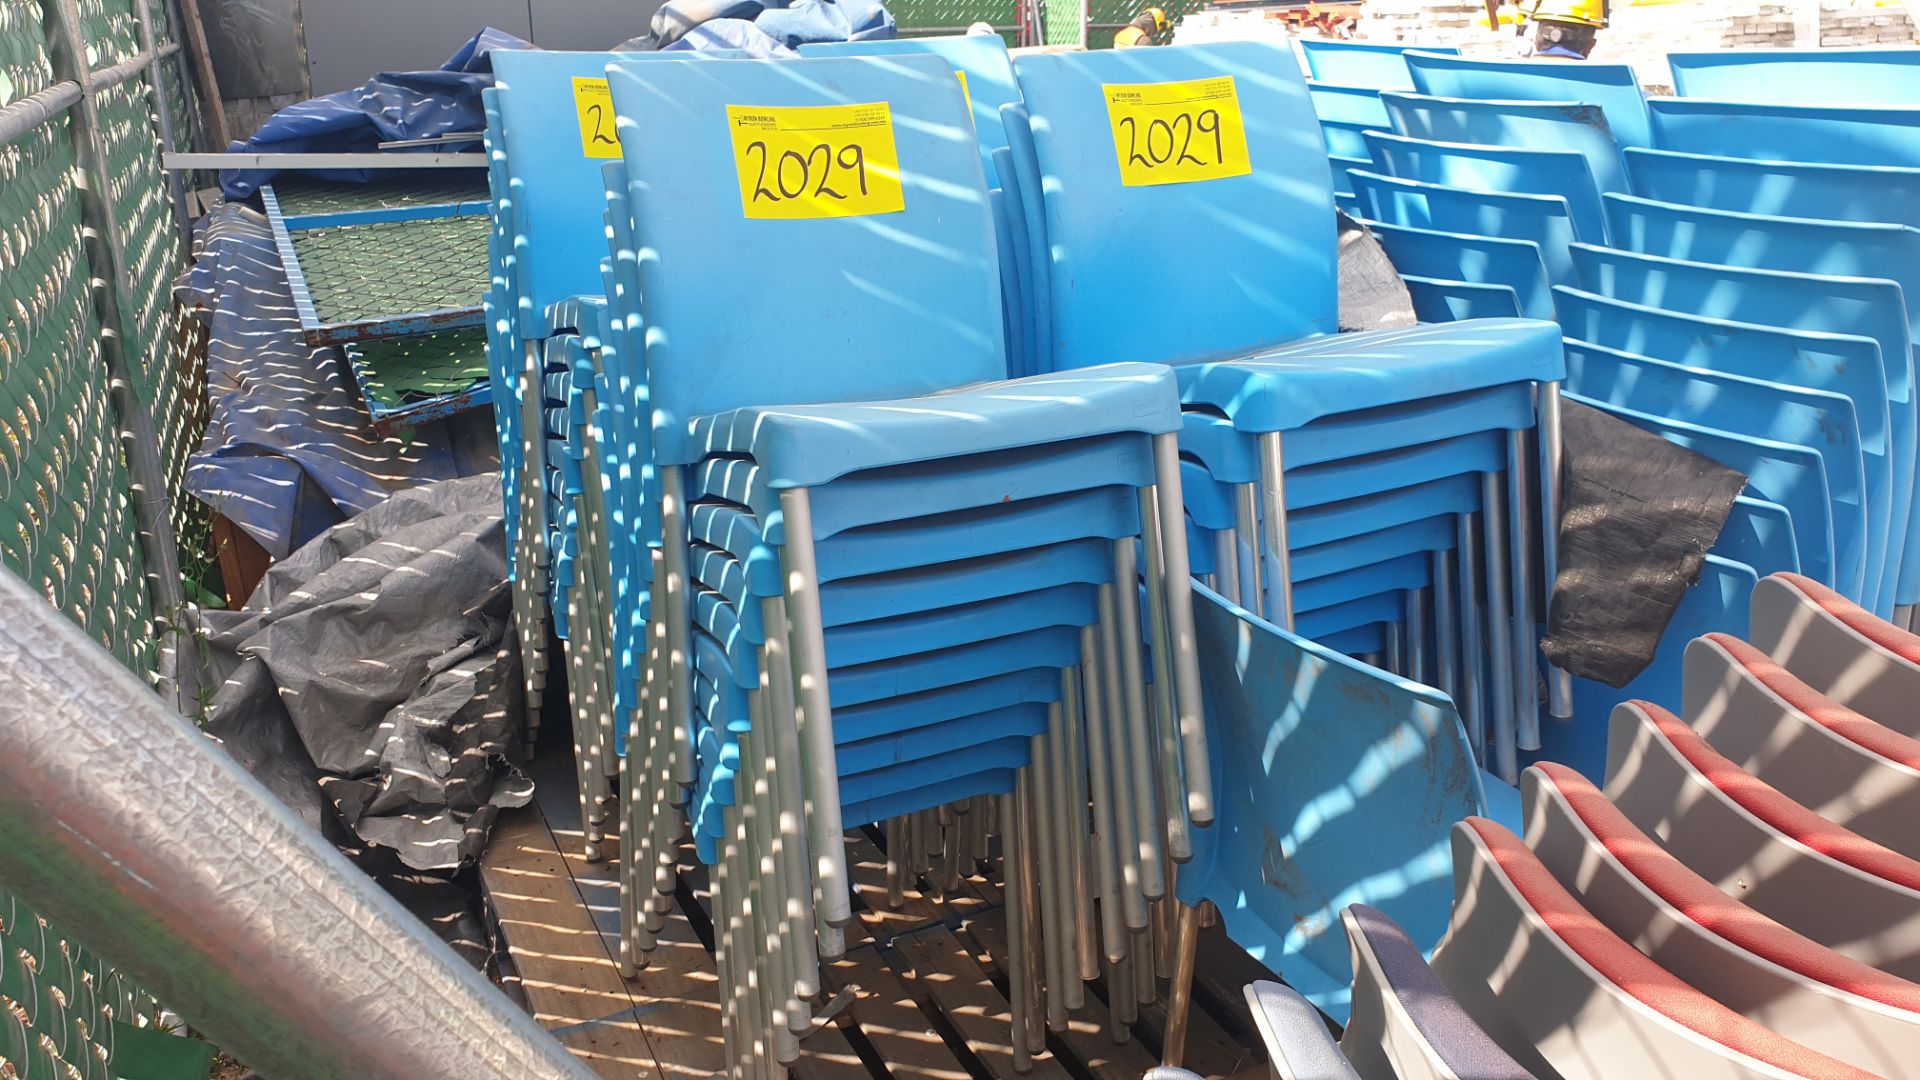 1 Lote of 40 blue plastic chairs, 7 metal chairs for office with backrest and upholstered seat - Bild 17 aus 22